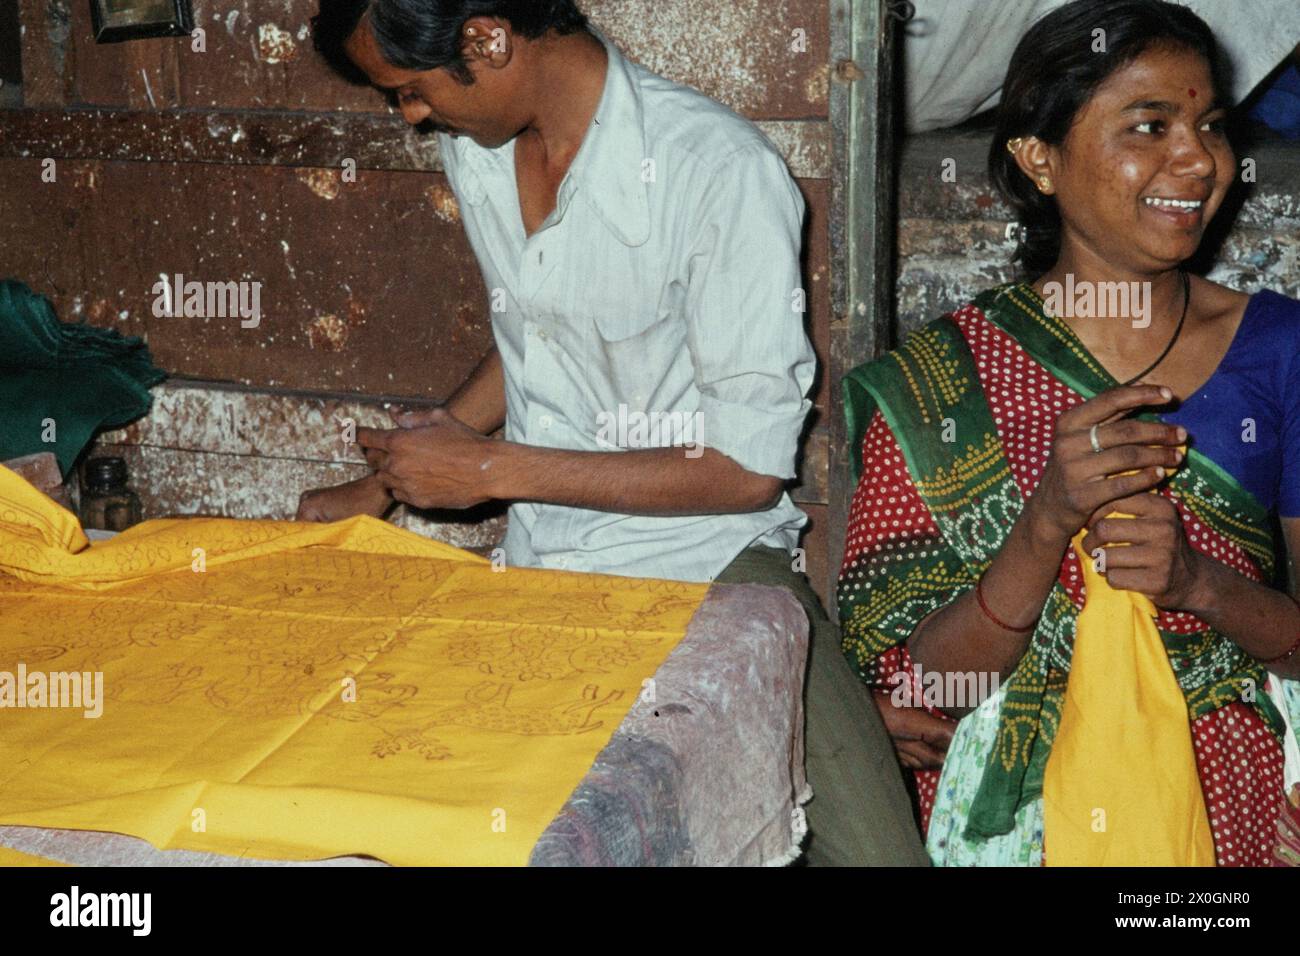 A man and a woman print patterns on yellow textiles in a fabric printing shop in Ahmedabad. [automated translation] Stock Photo